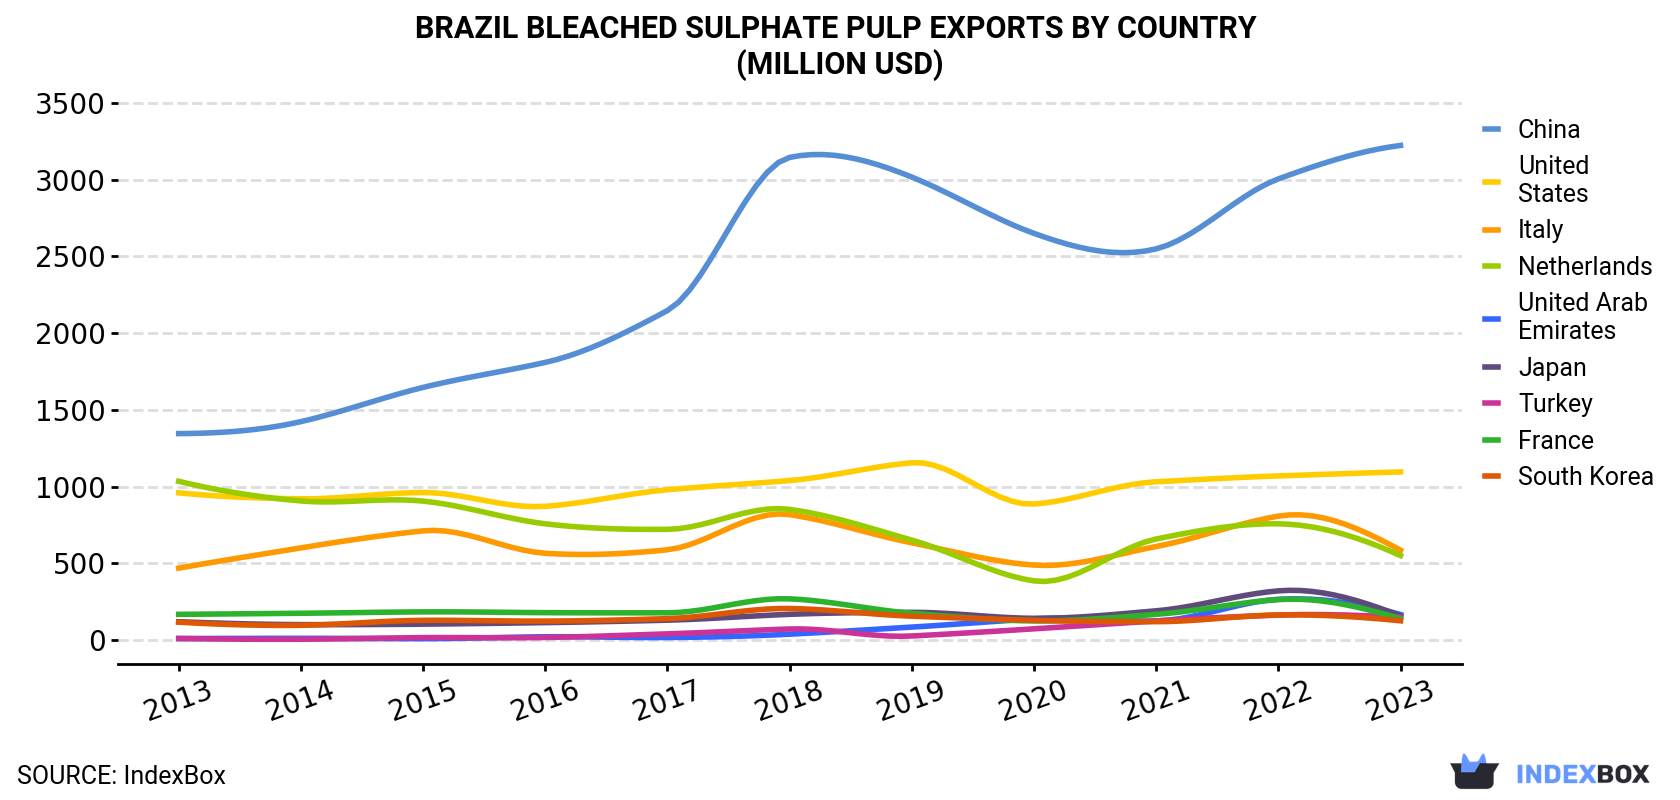 Brazil Bleached Sulphate Pulp Exports By Country (Million USD)